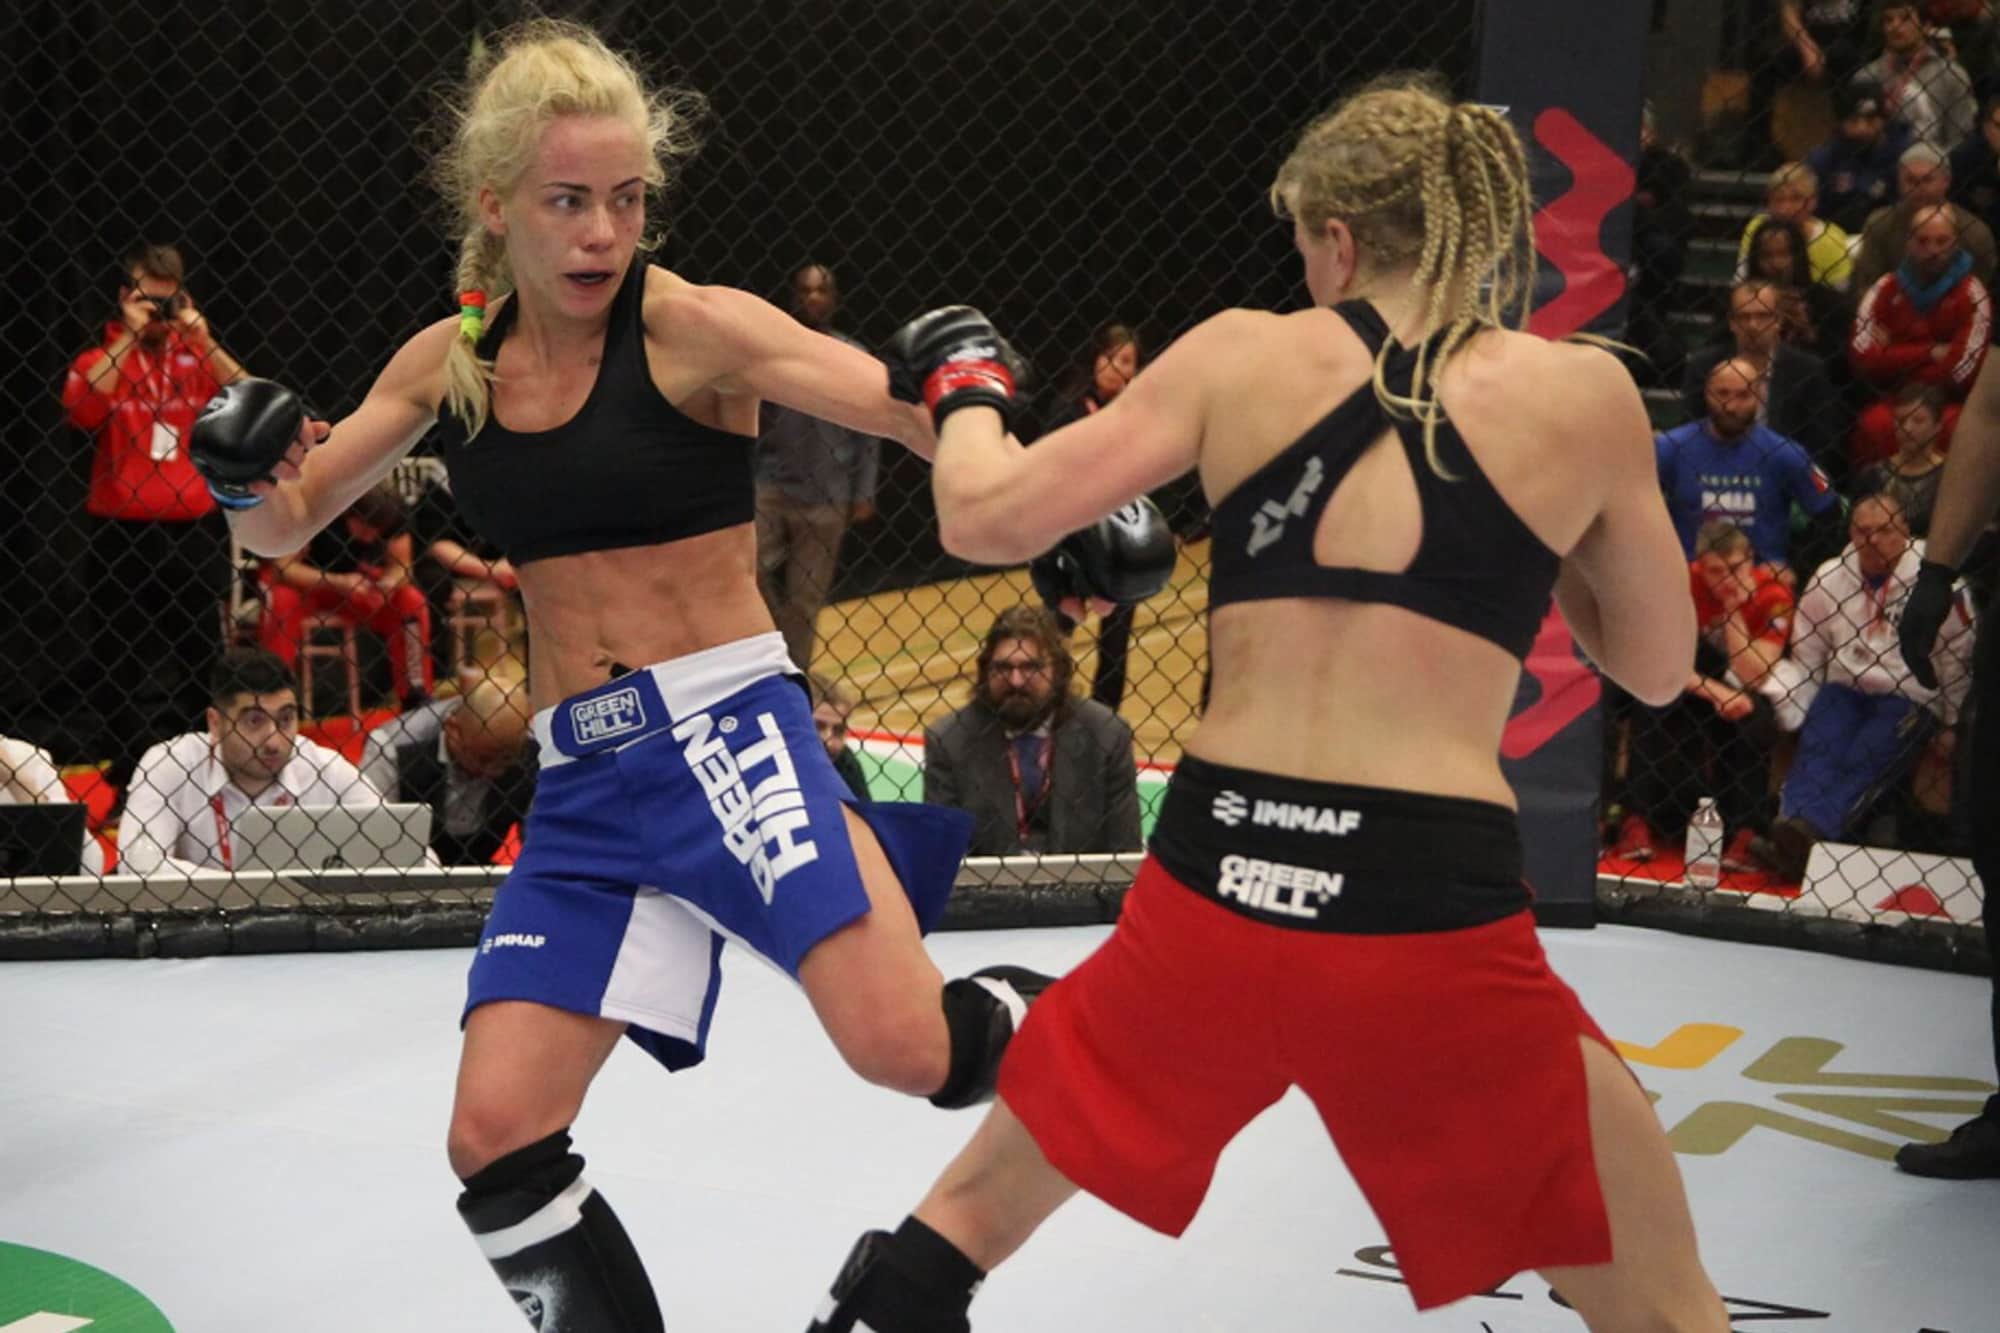 2015 Throwback: 5 one-and-done European Open winners who could have been IMMAF World champions